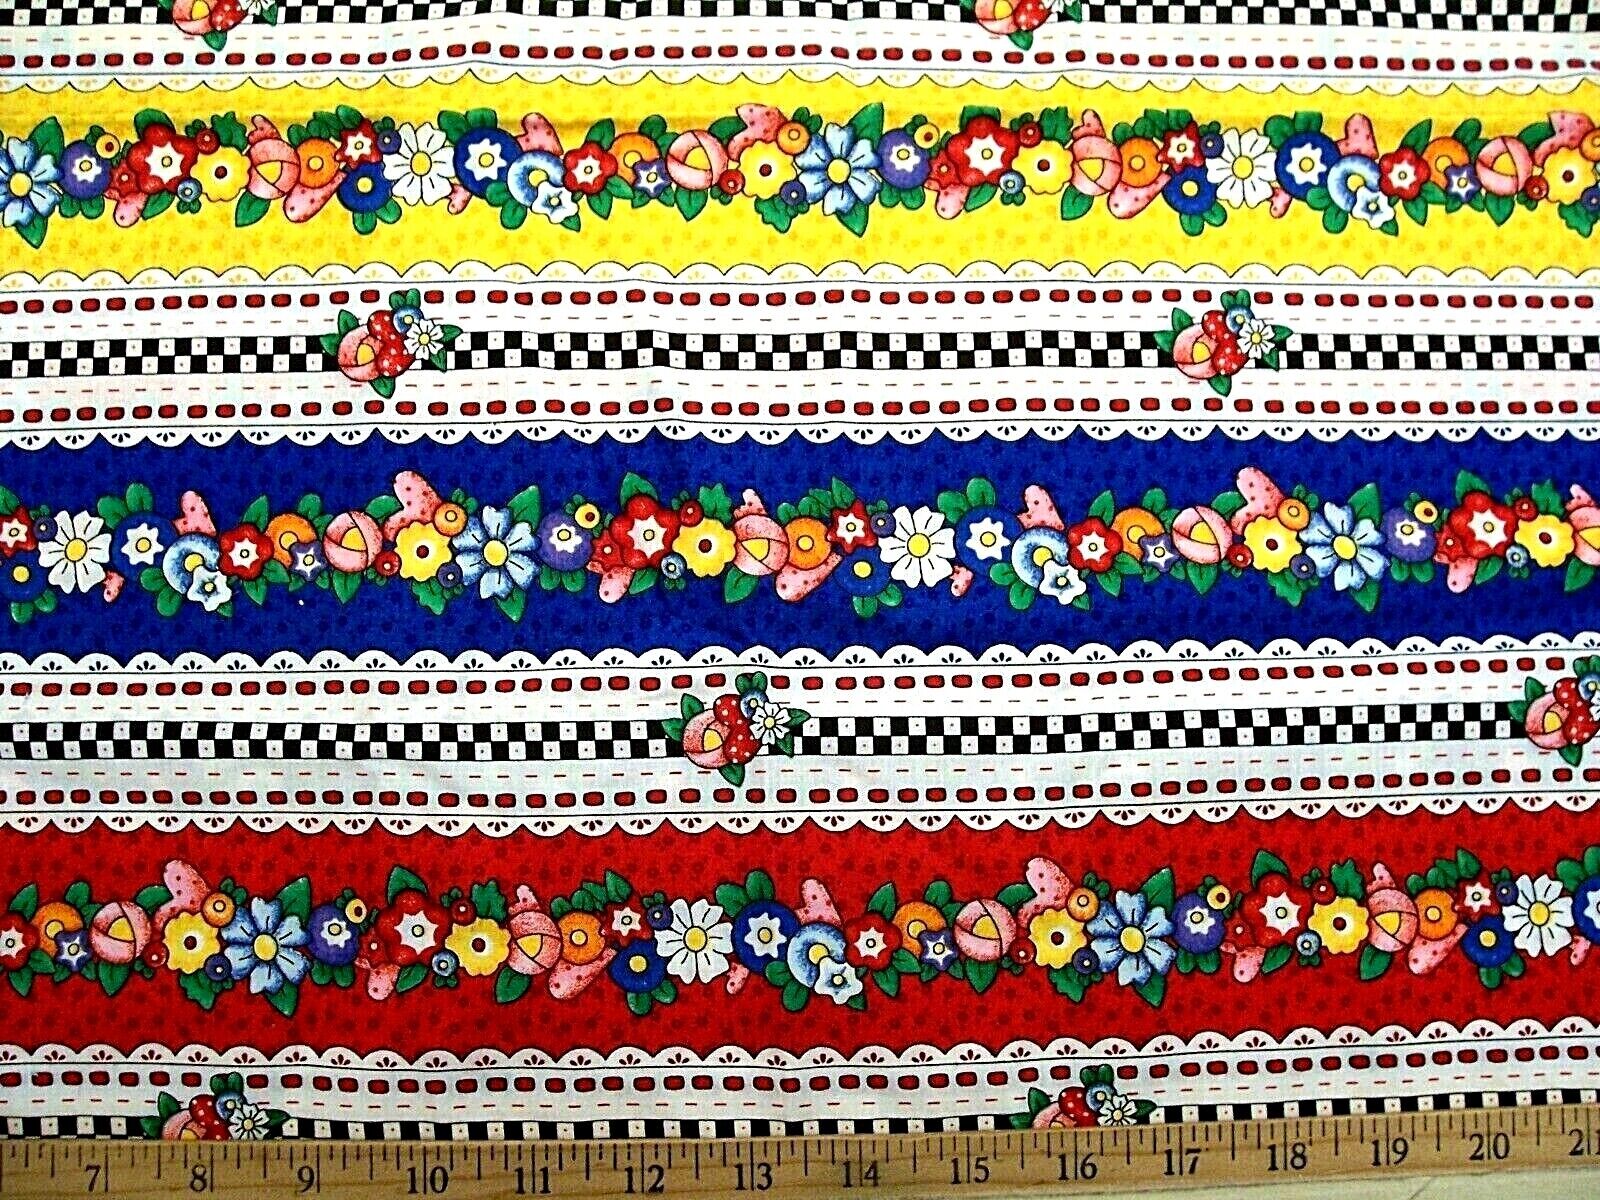 CHOOSE : MARY ENGELBREIT FLORAL LACE COTTON FABRIC BORDER STRIP RED BLUE YELLOW